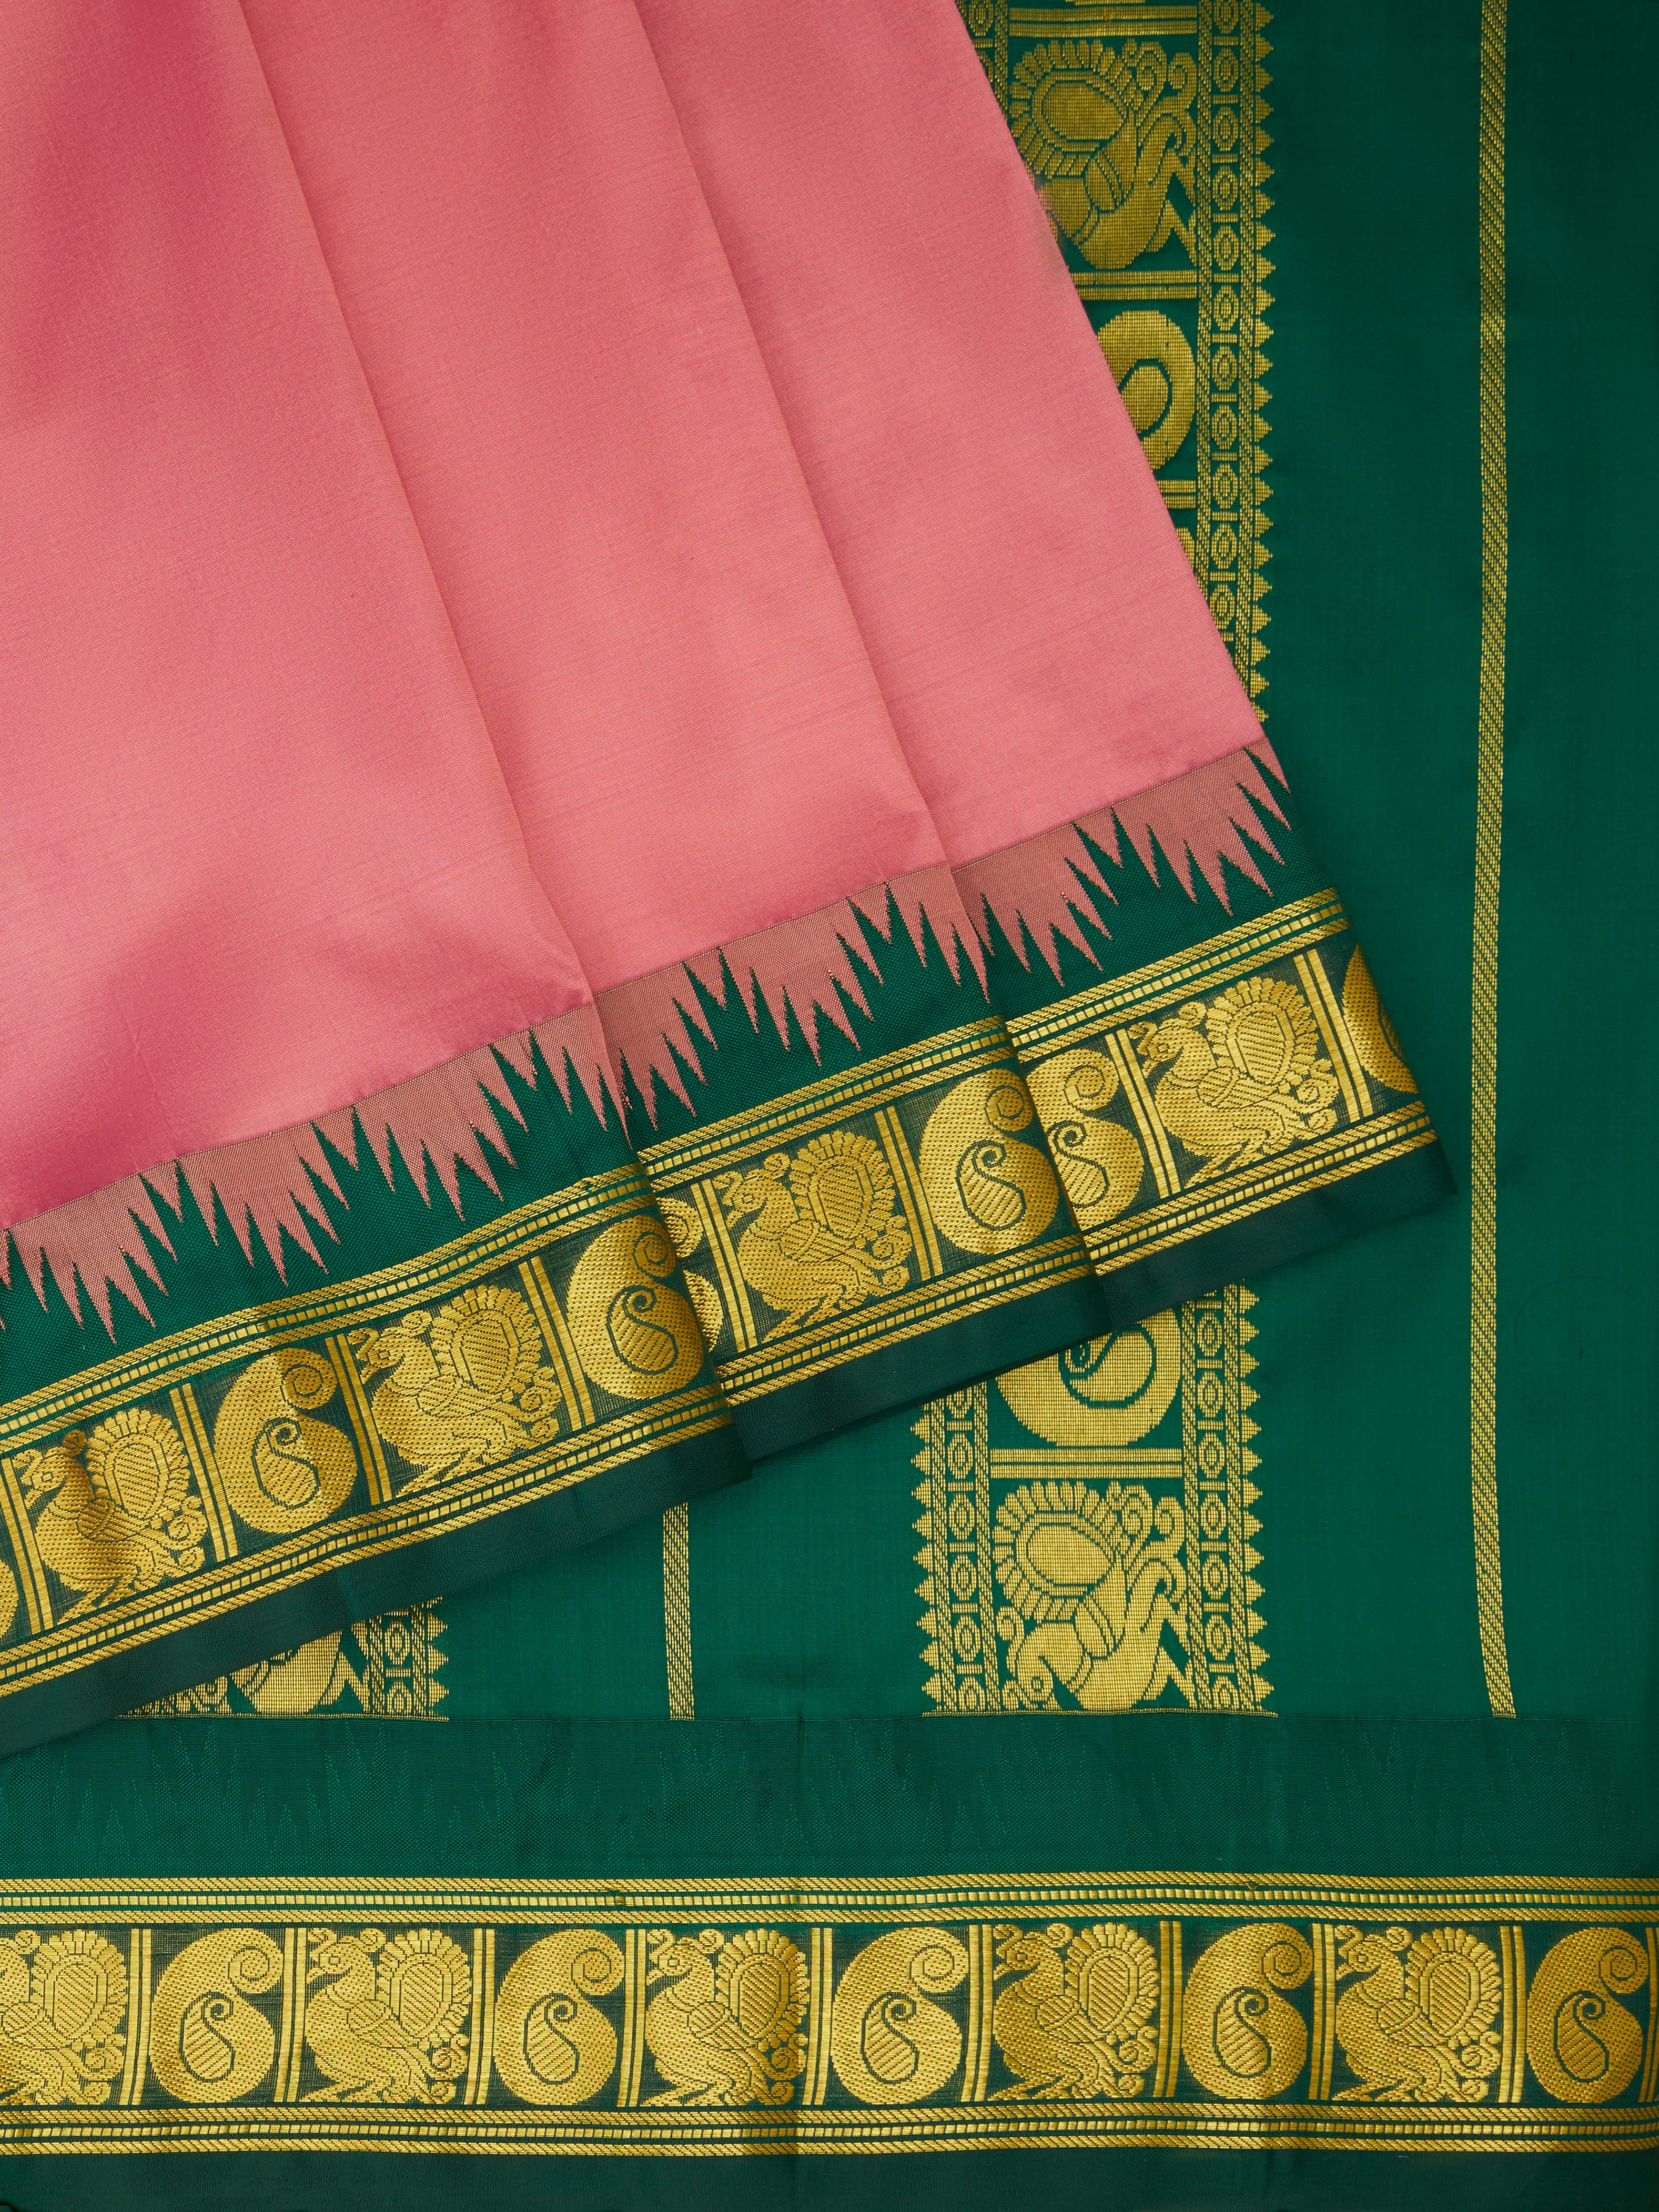 BUY EXCLUSIVE 9 YARDS SILK SAREE IN INDIA | HOUSE OF HIND – House of Hind